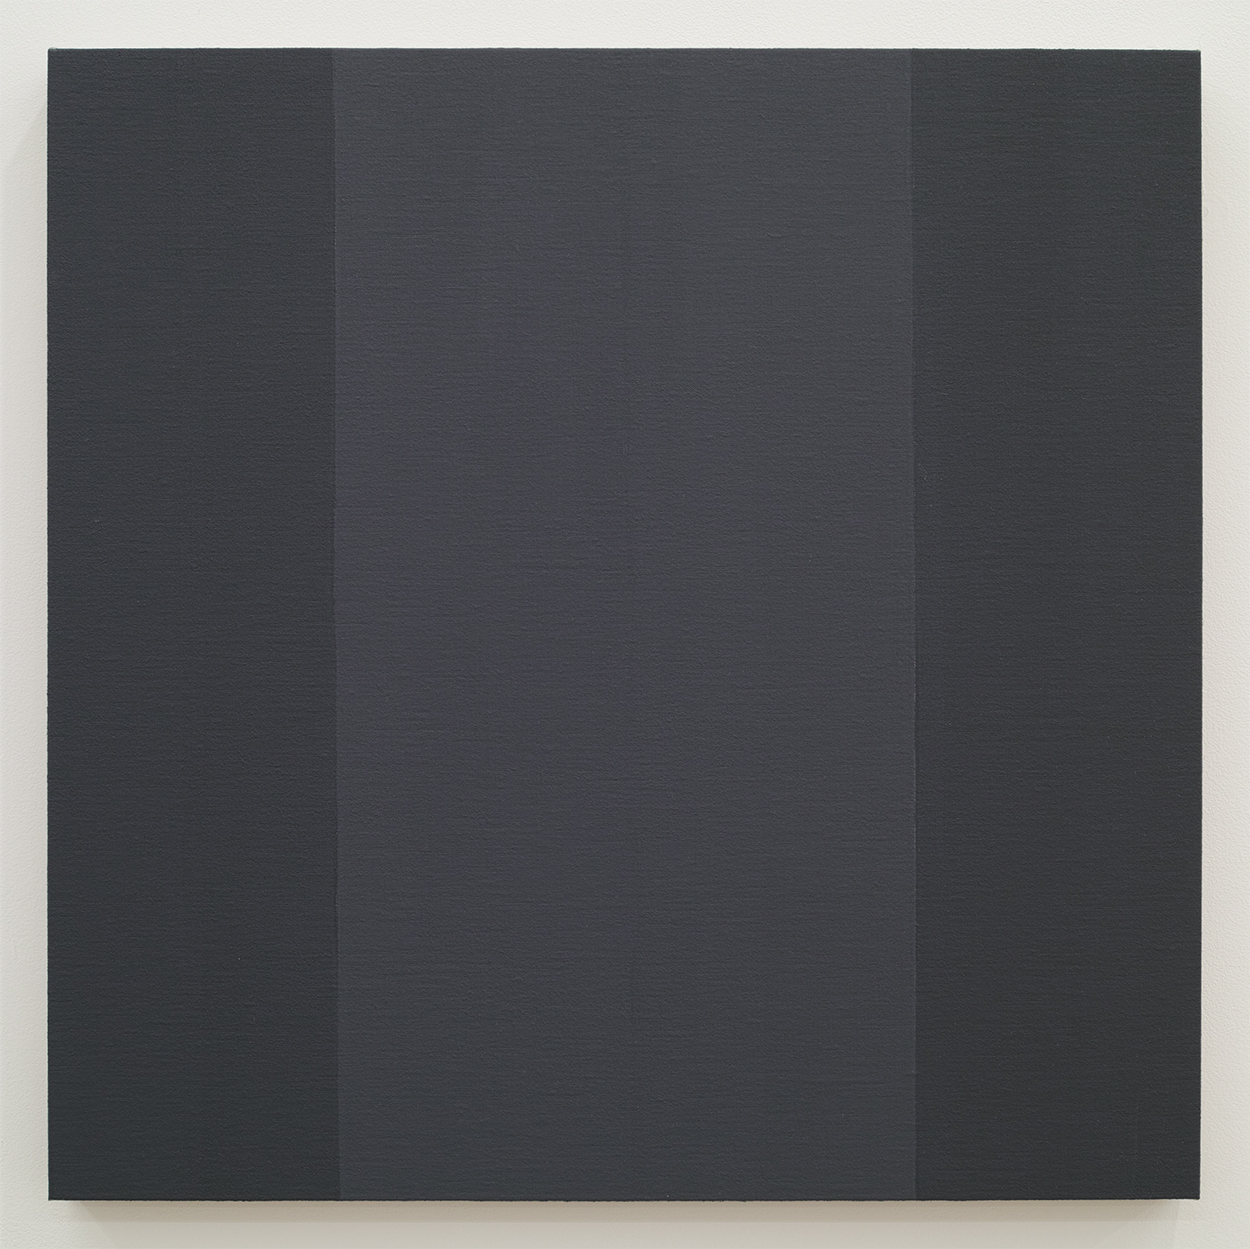 TS901｜Gesso on linen on panel｜45 x 45 cm｜2009